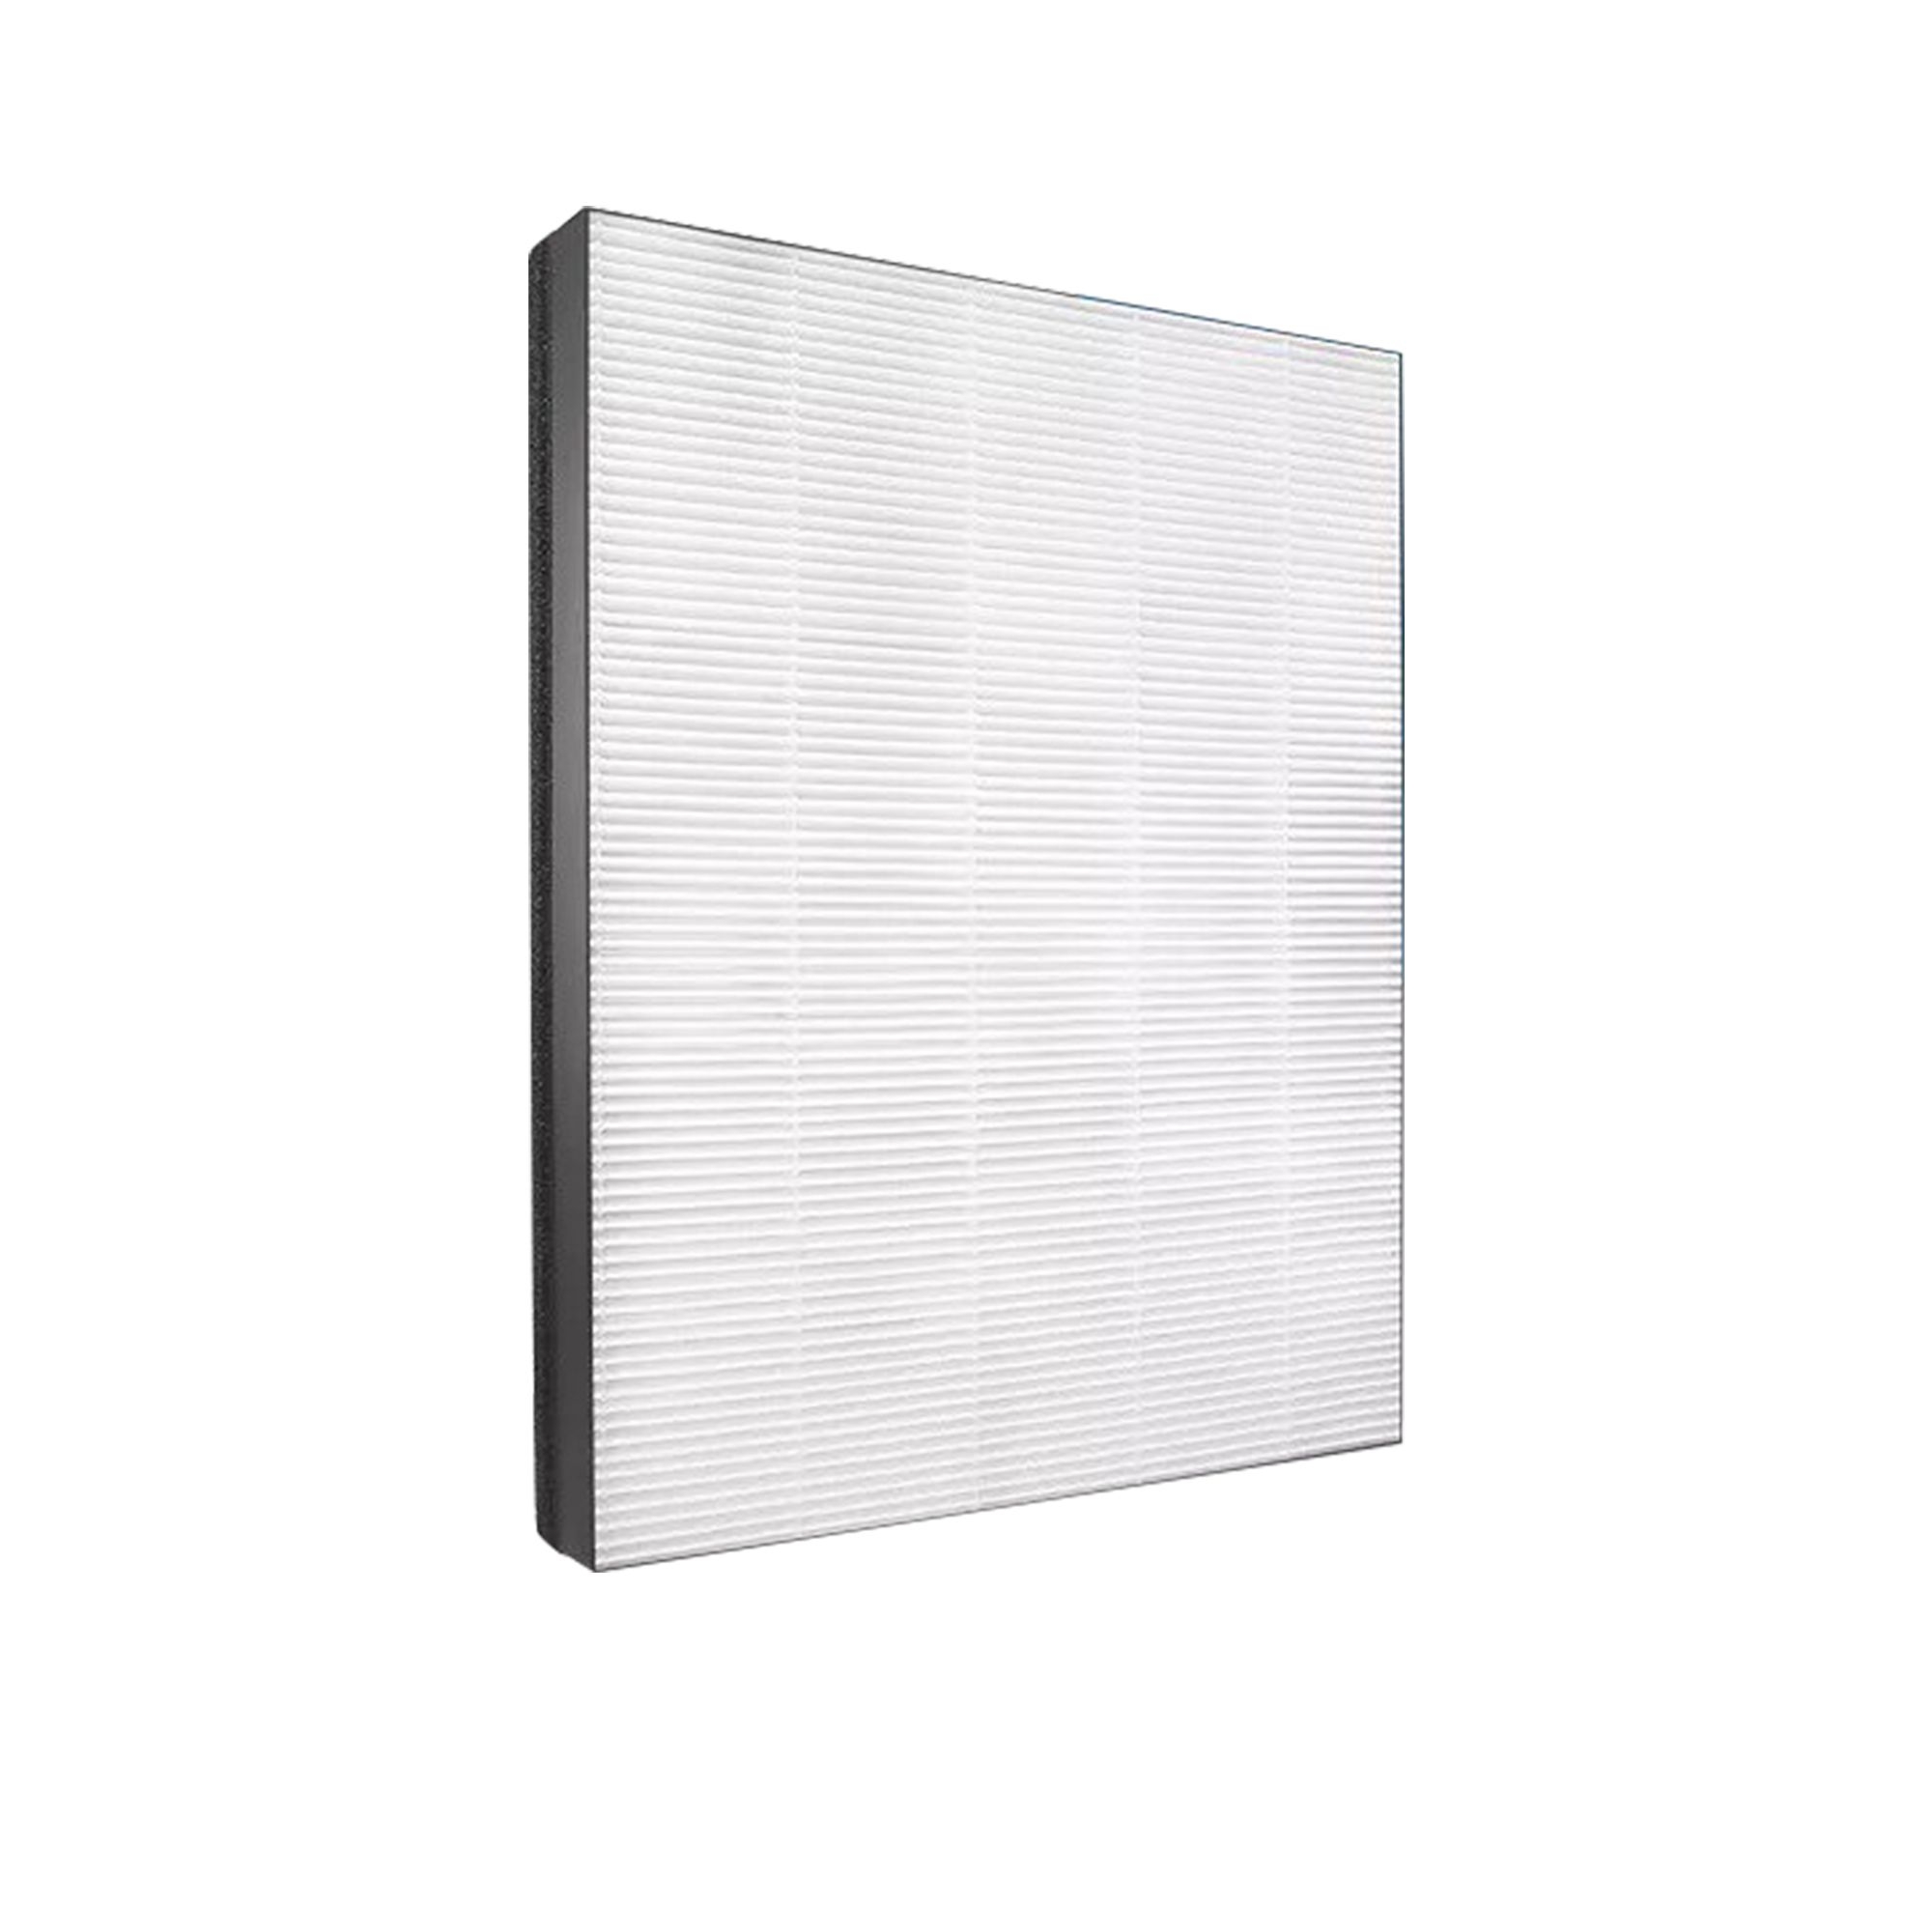 Philips NanoProtect 1000 Series HEPA Filter Replacement for AC1215/70 Image 1